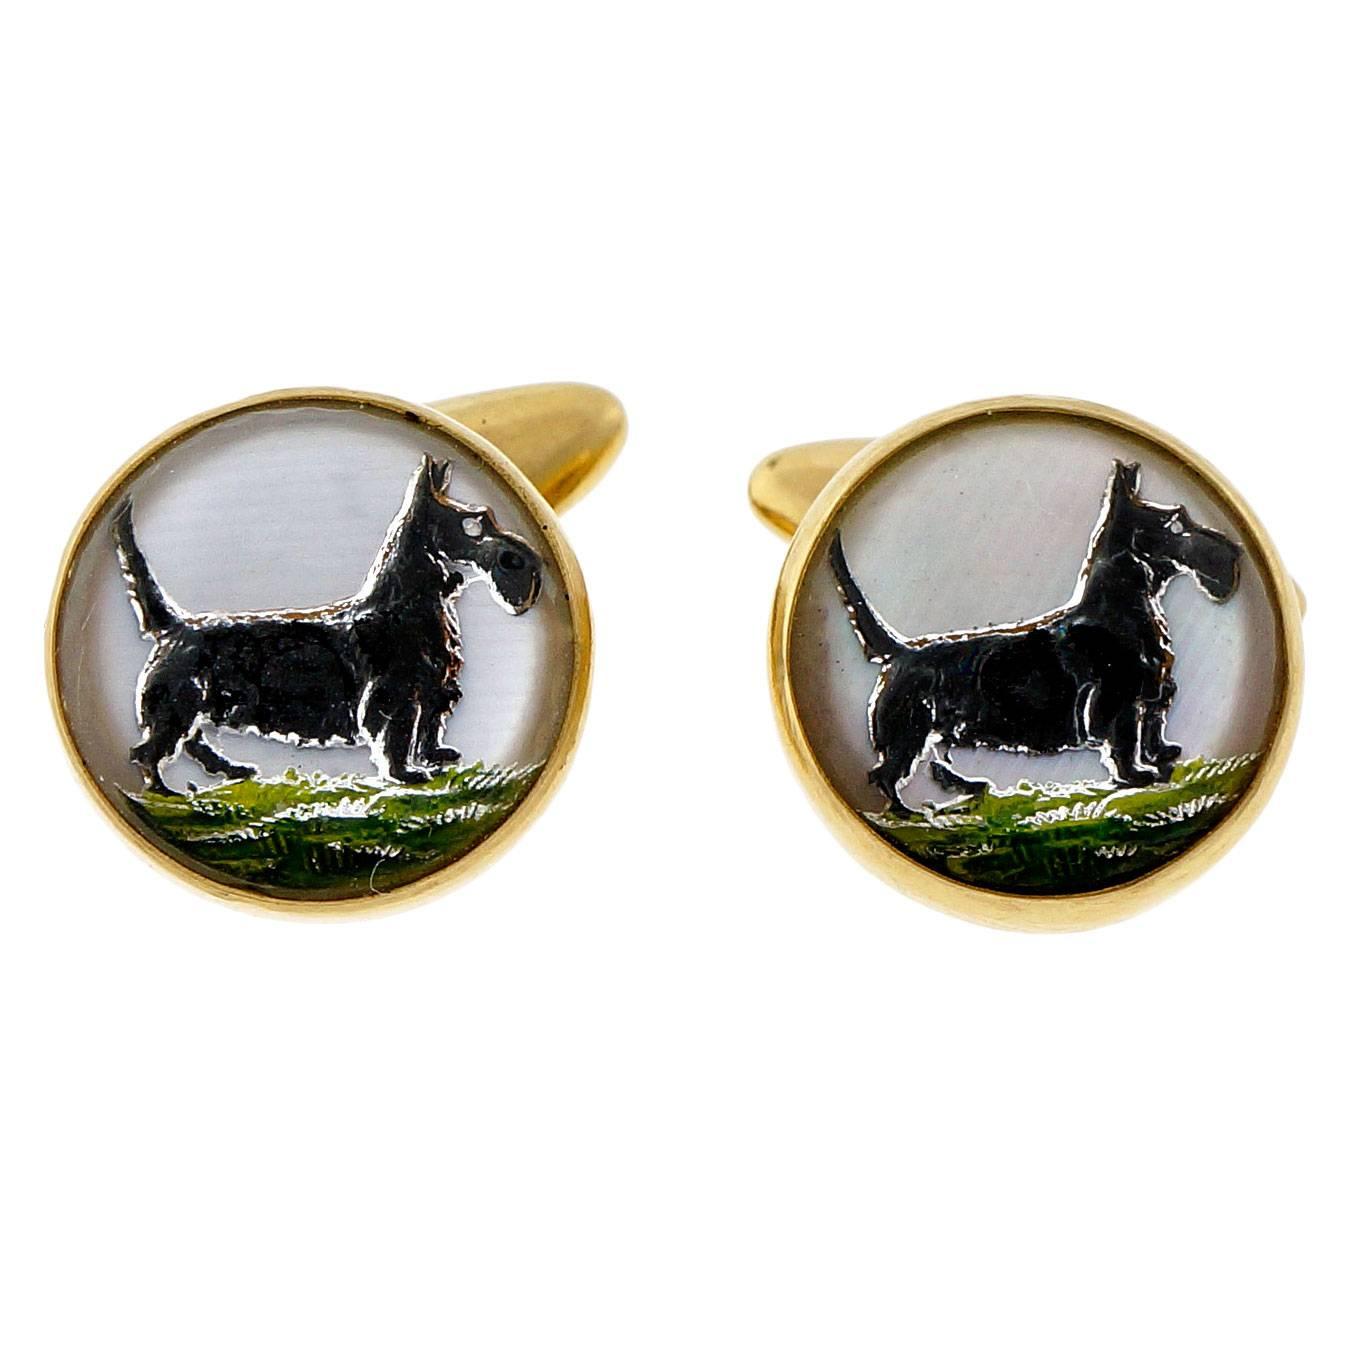 Quartz Crystal Hand Painted Carved Scotty Dog Gold Cufflinks